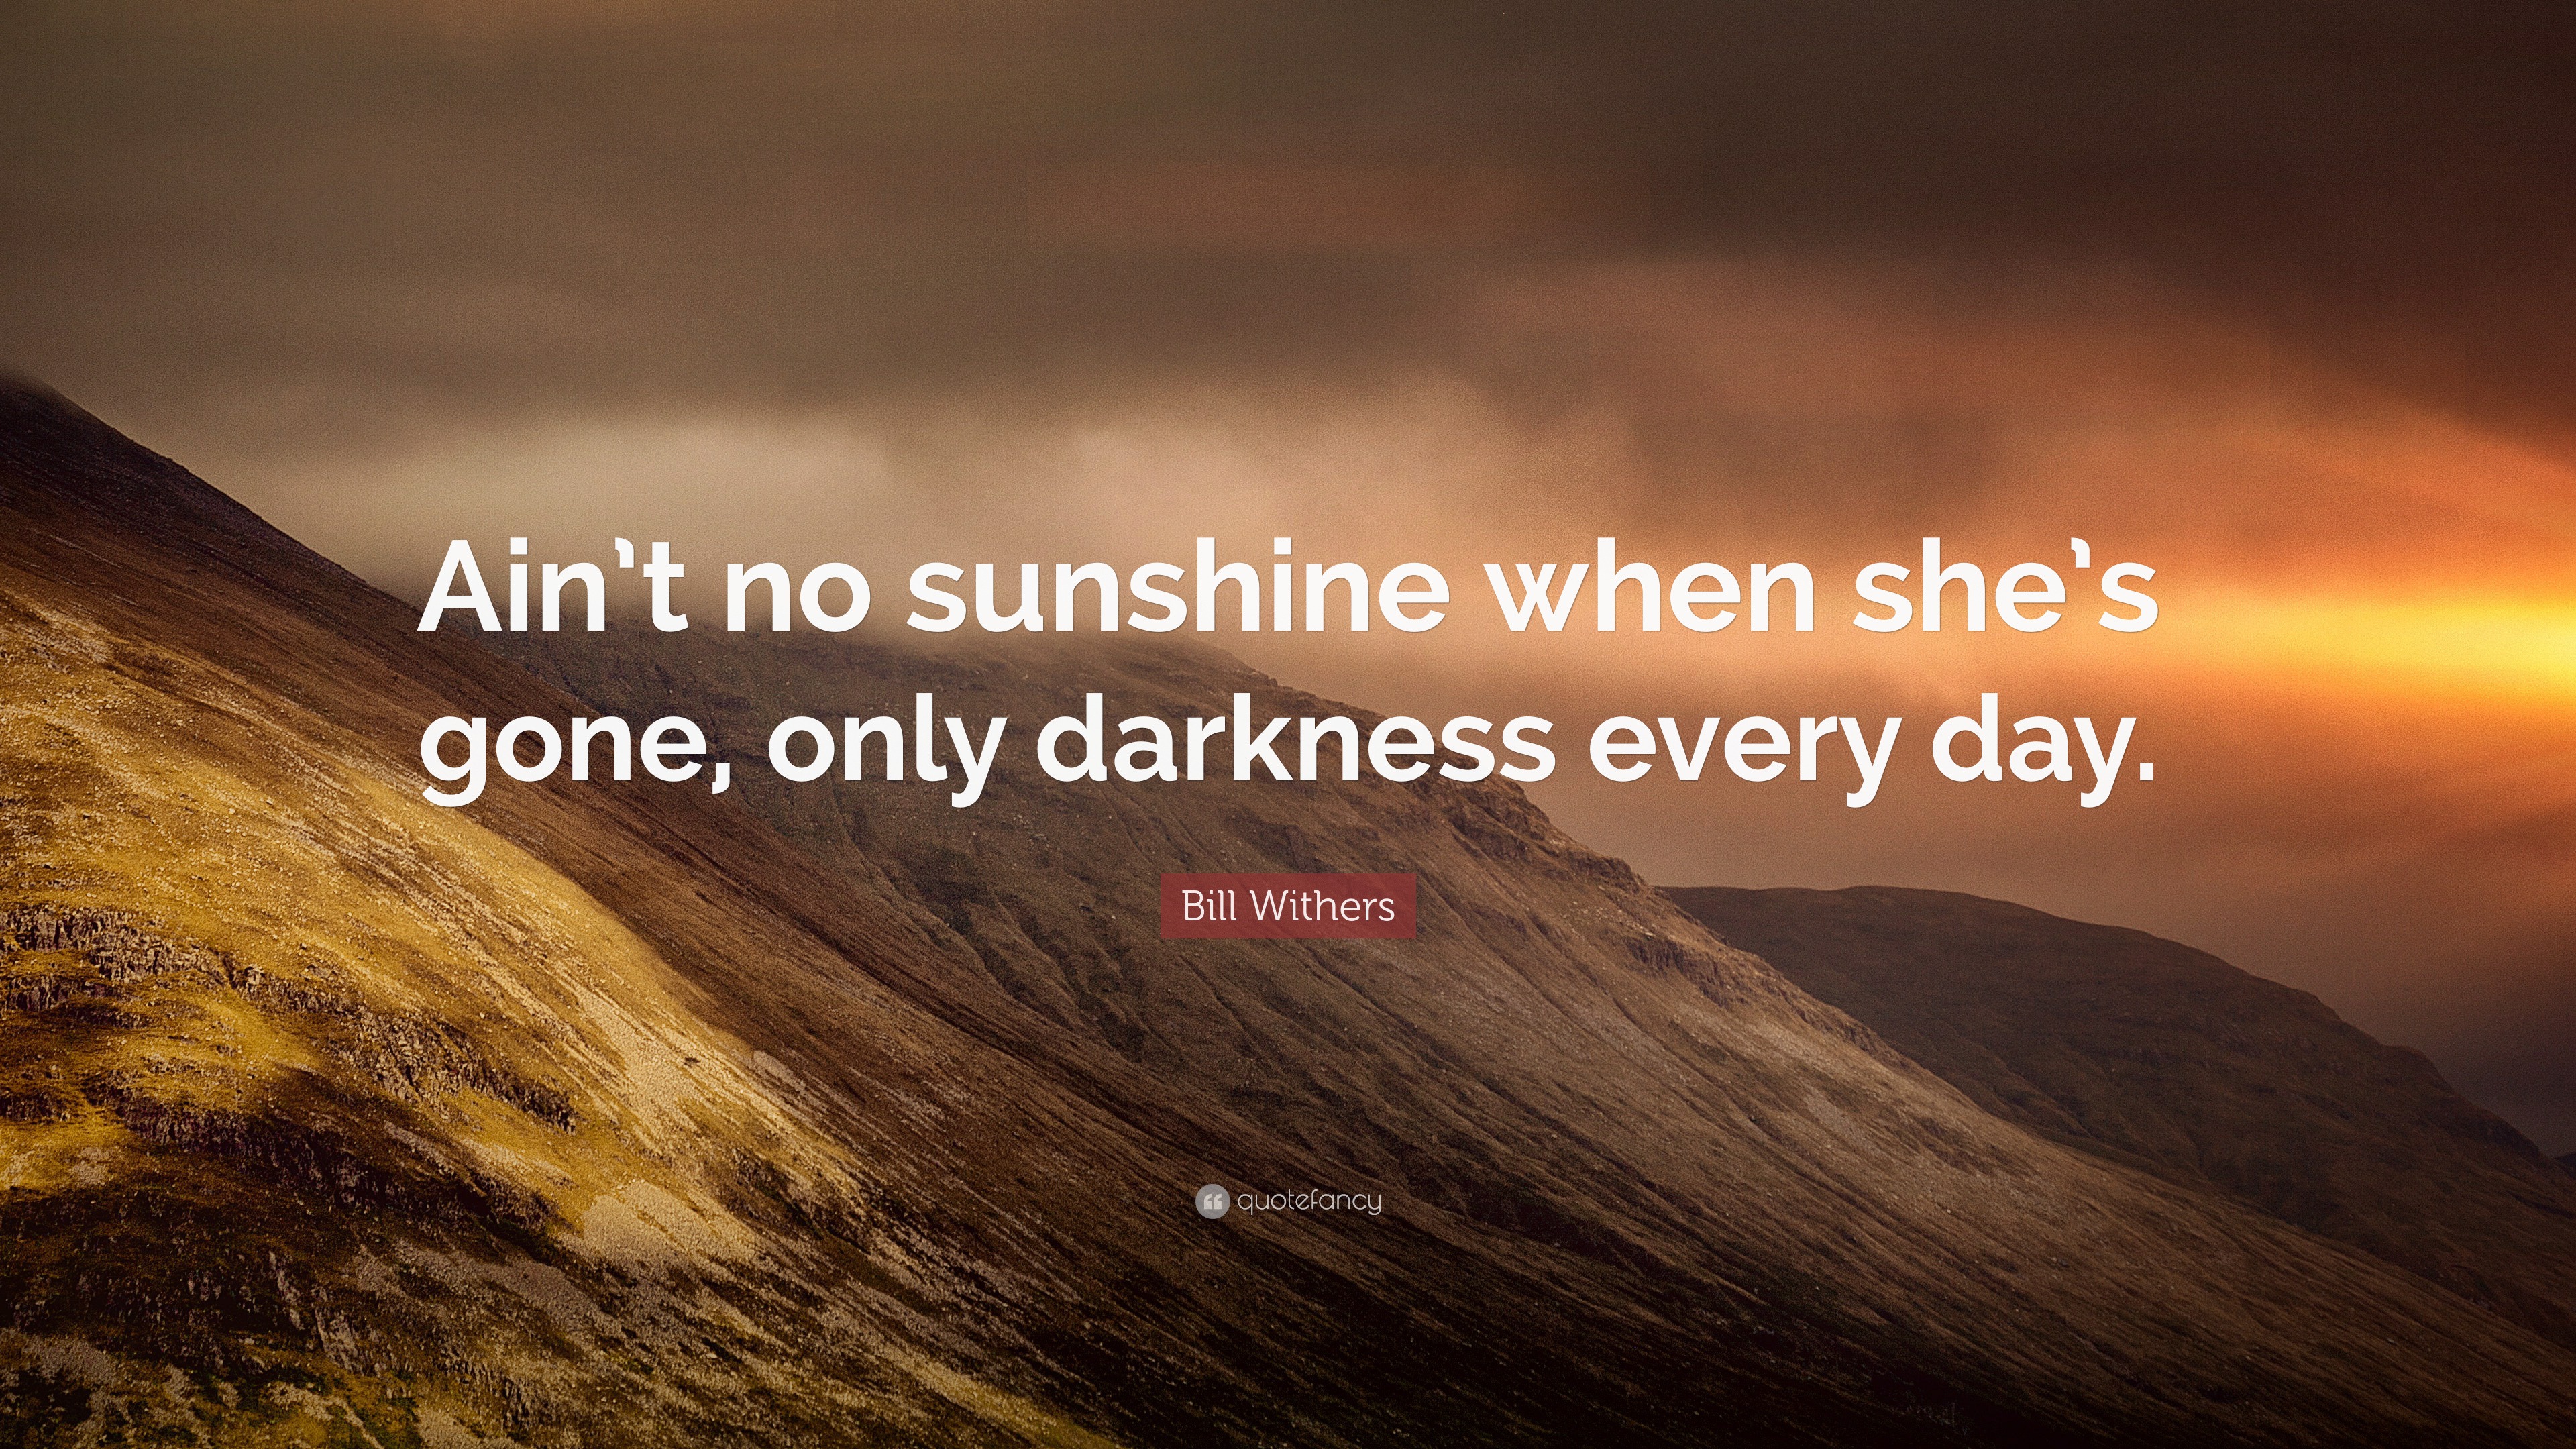 Bill Withers Quote: “Ain't No Sunshine When She's Gone, Only Darkness Every Day.”